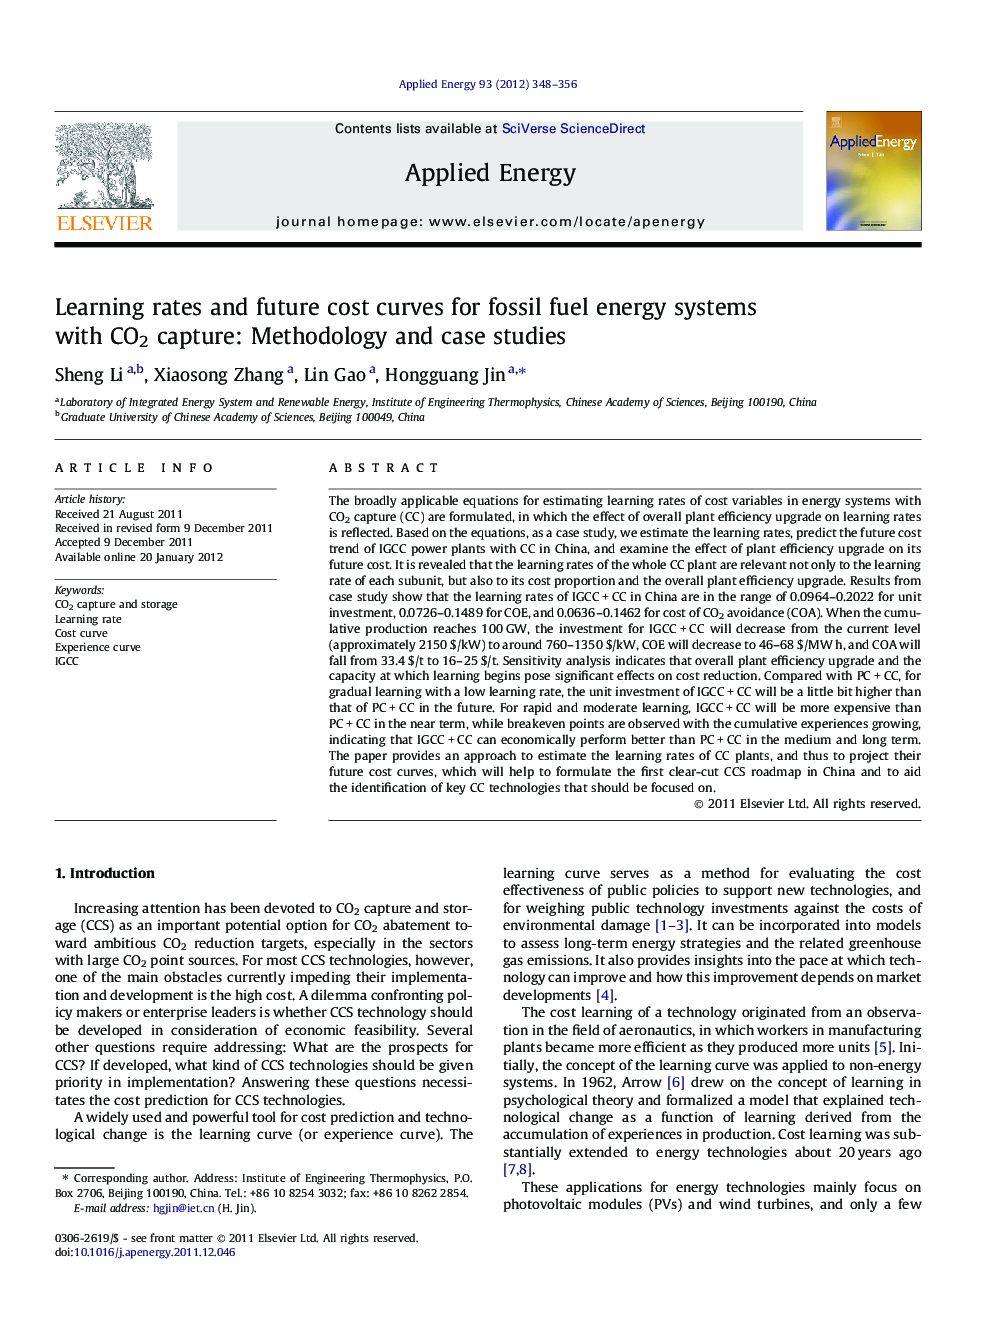 Learning rates and future cost curves for fossil fuel energy systems with CO2 capture: Methodology and case studies